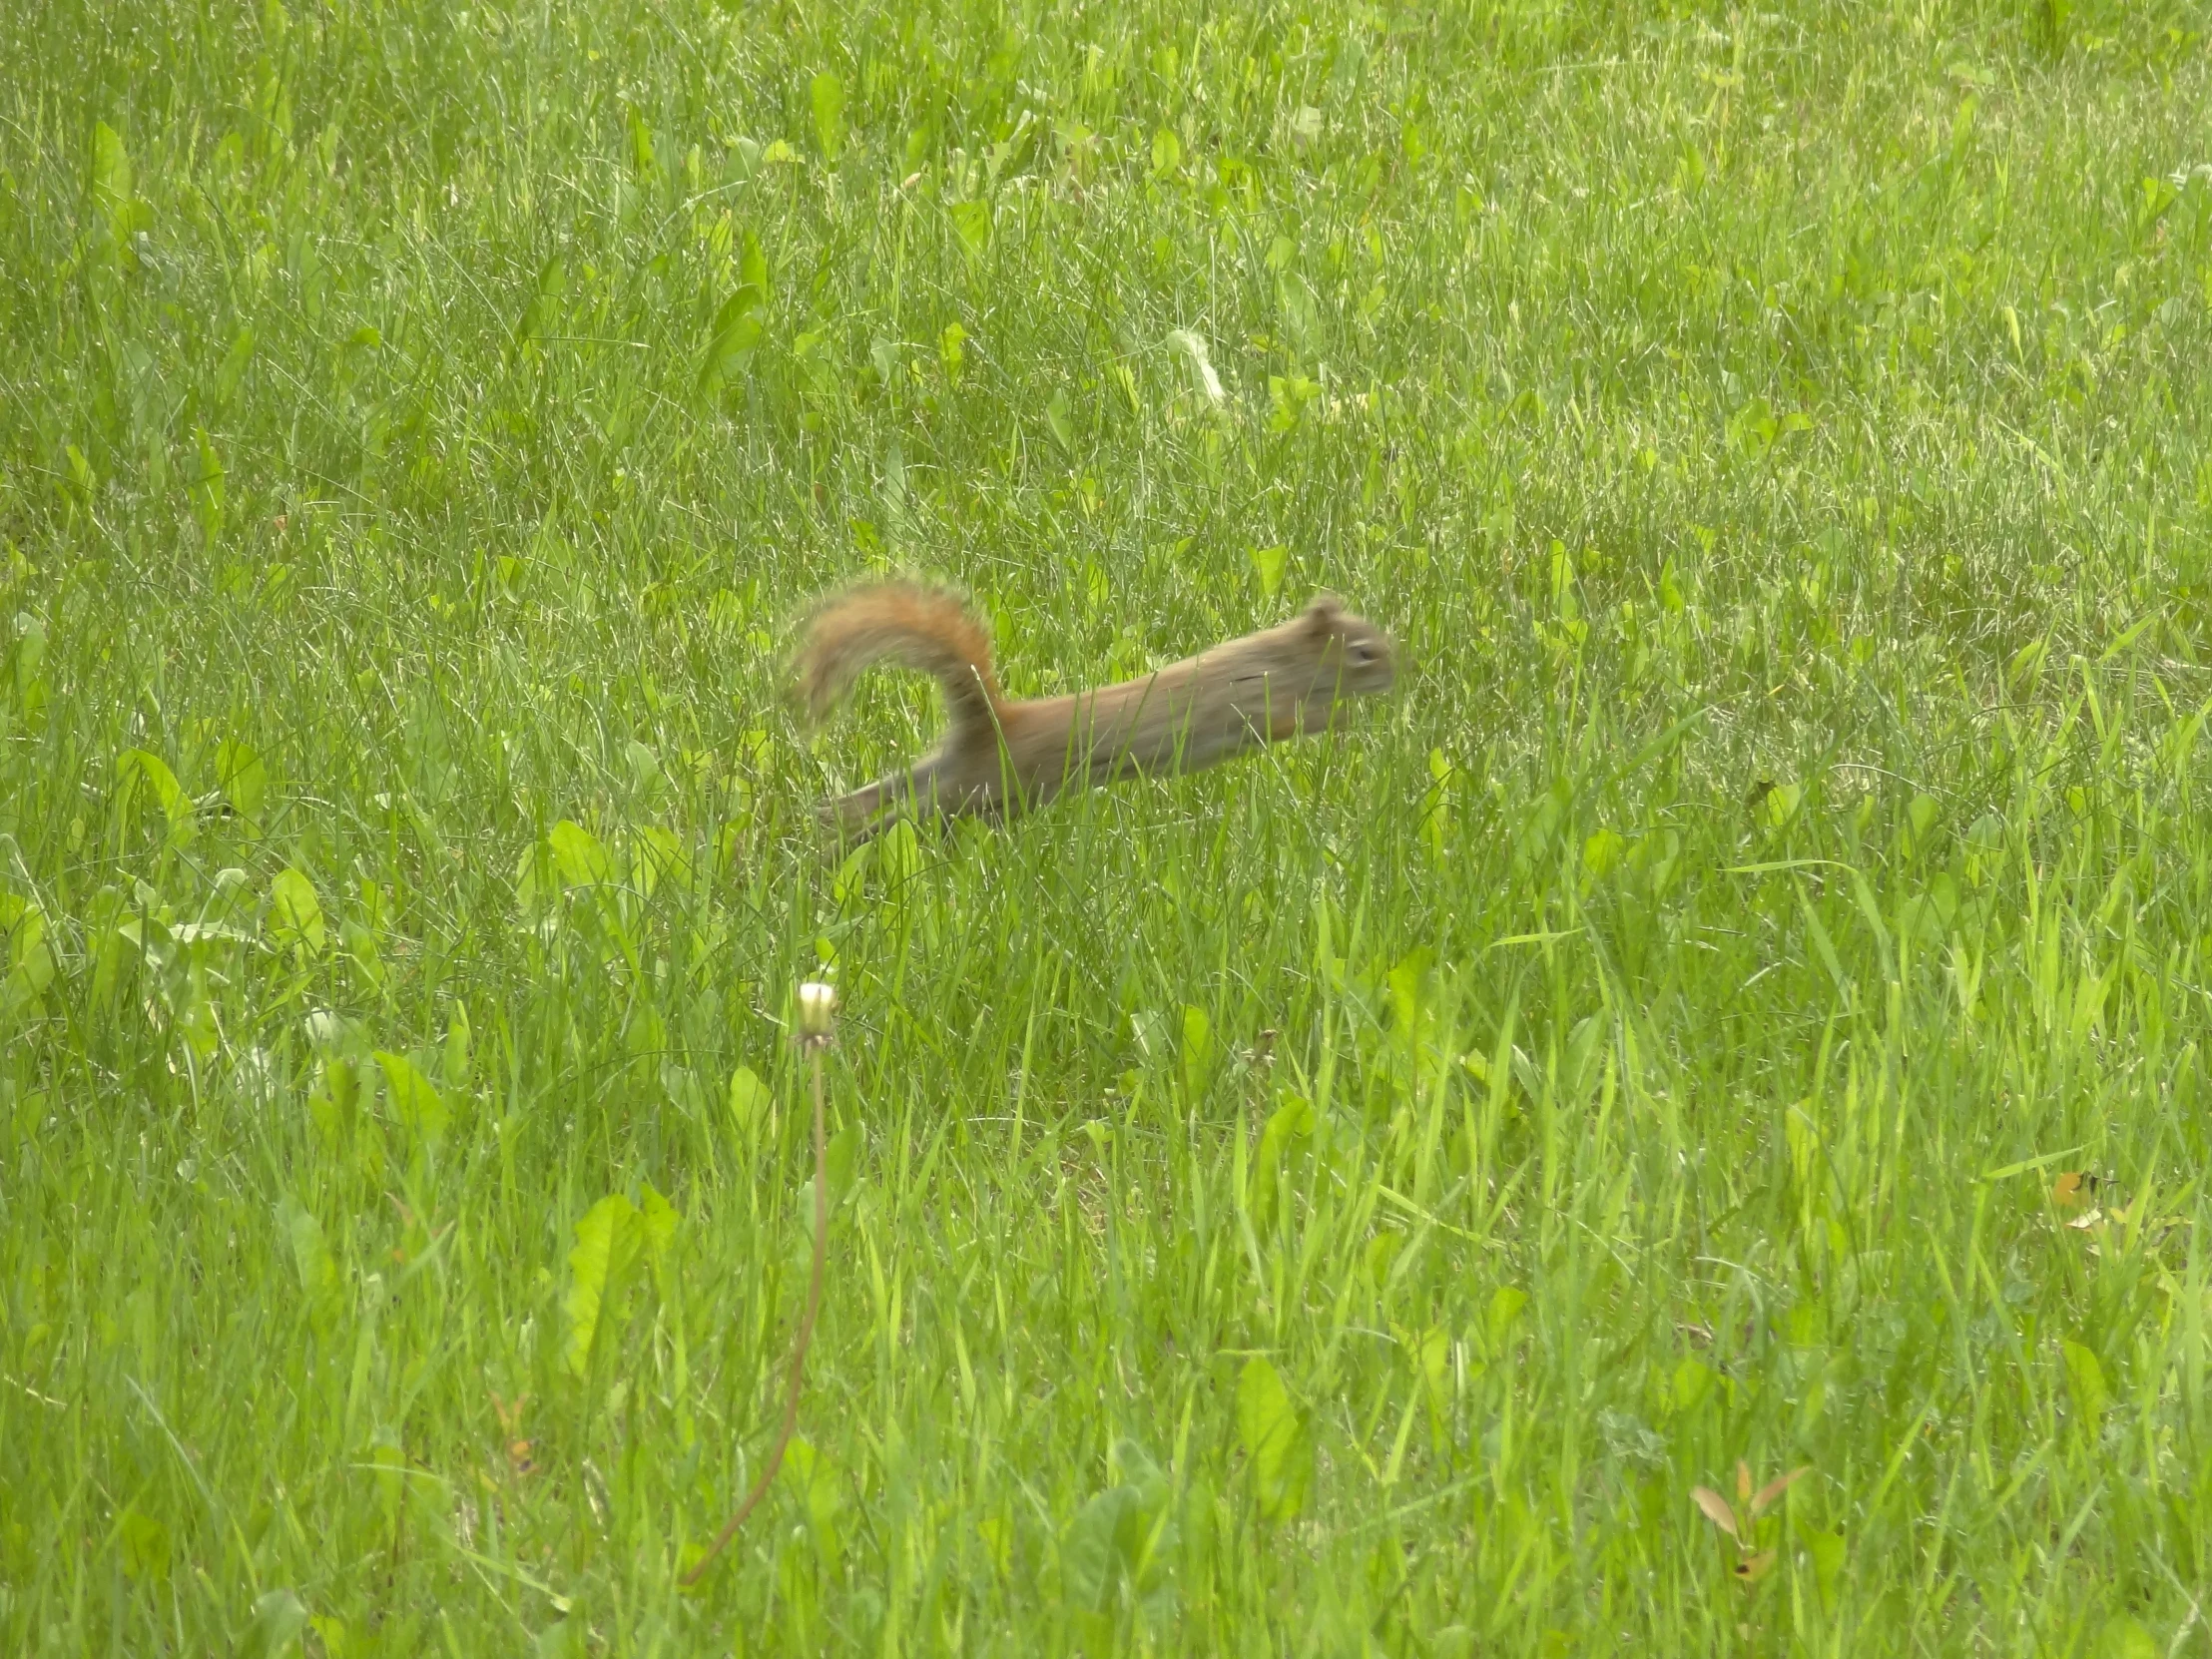 a squirrel sitting in the middle of the tall grass